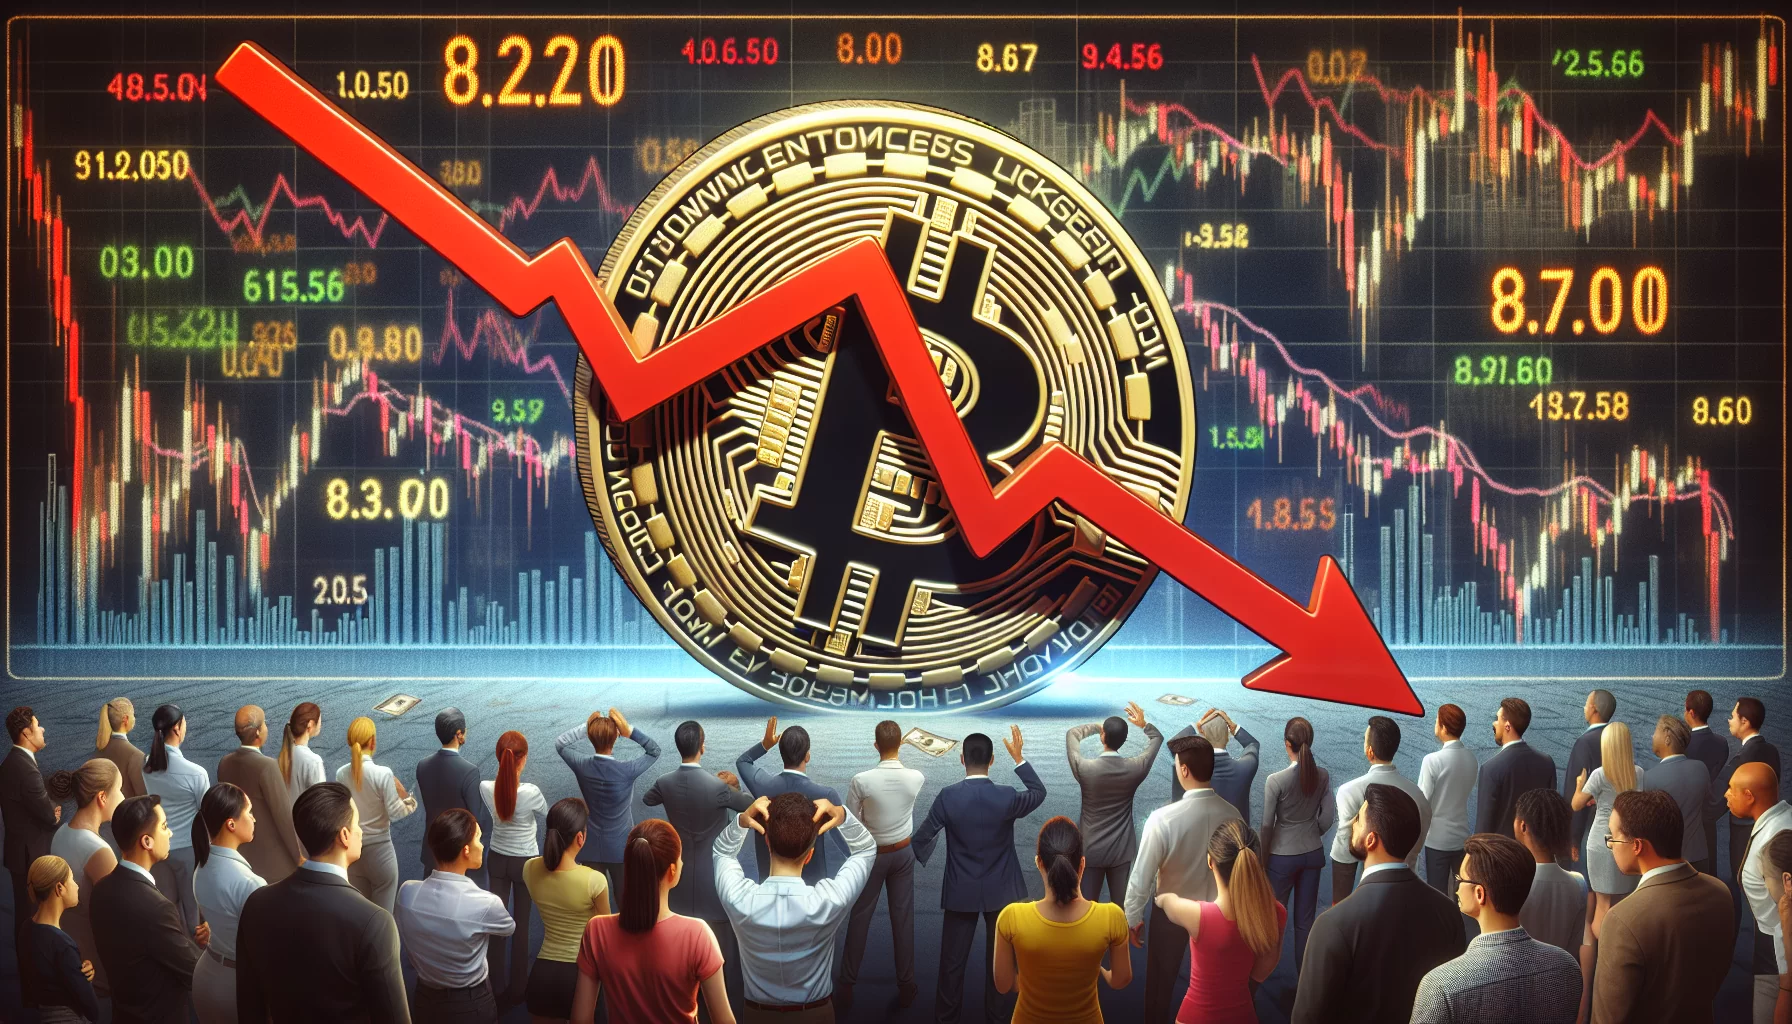 Bitcoin's downturn triggers concerns of a broader crypto market sell-off